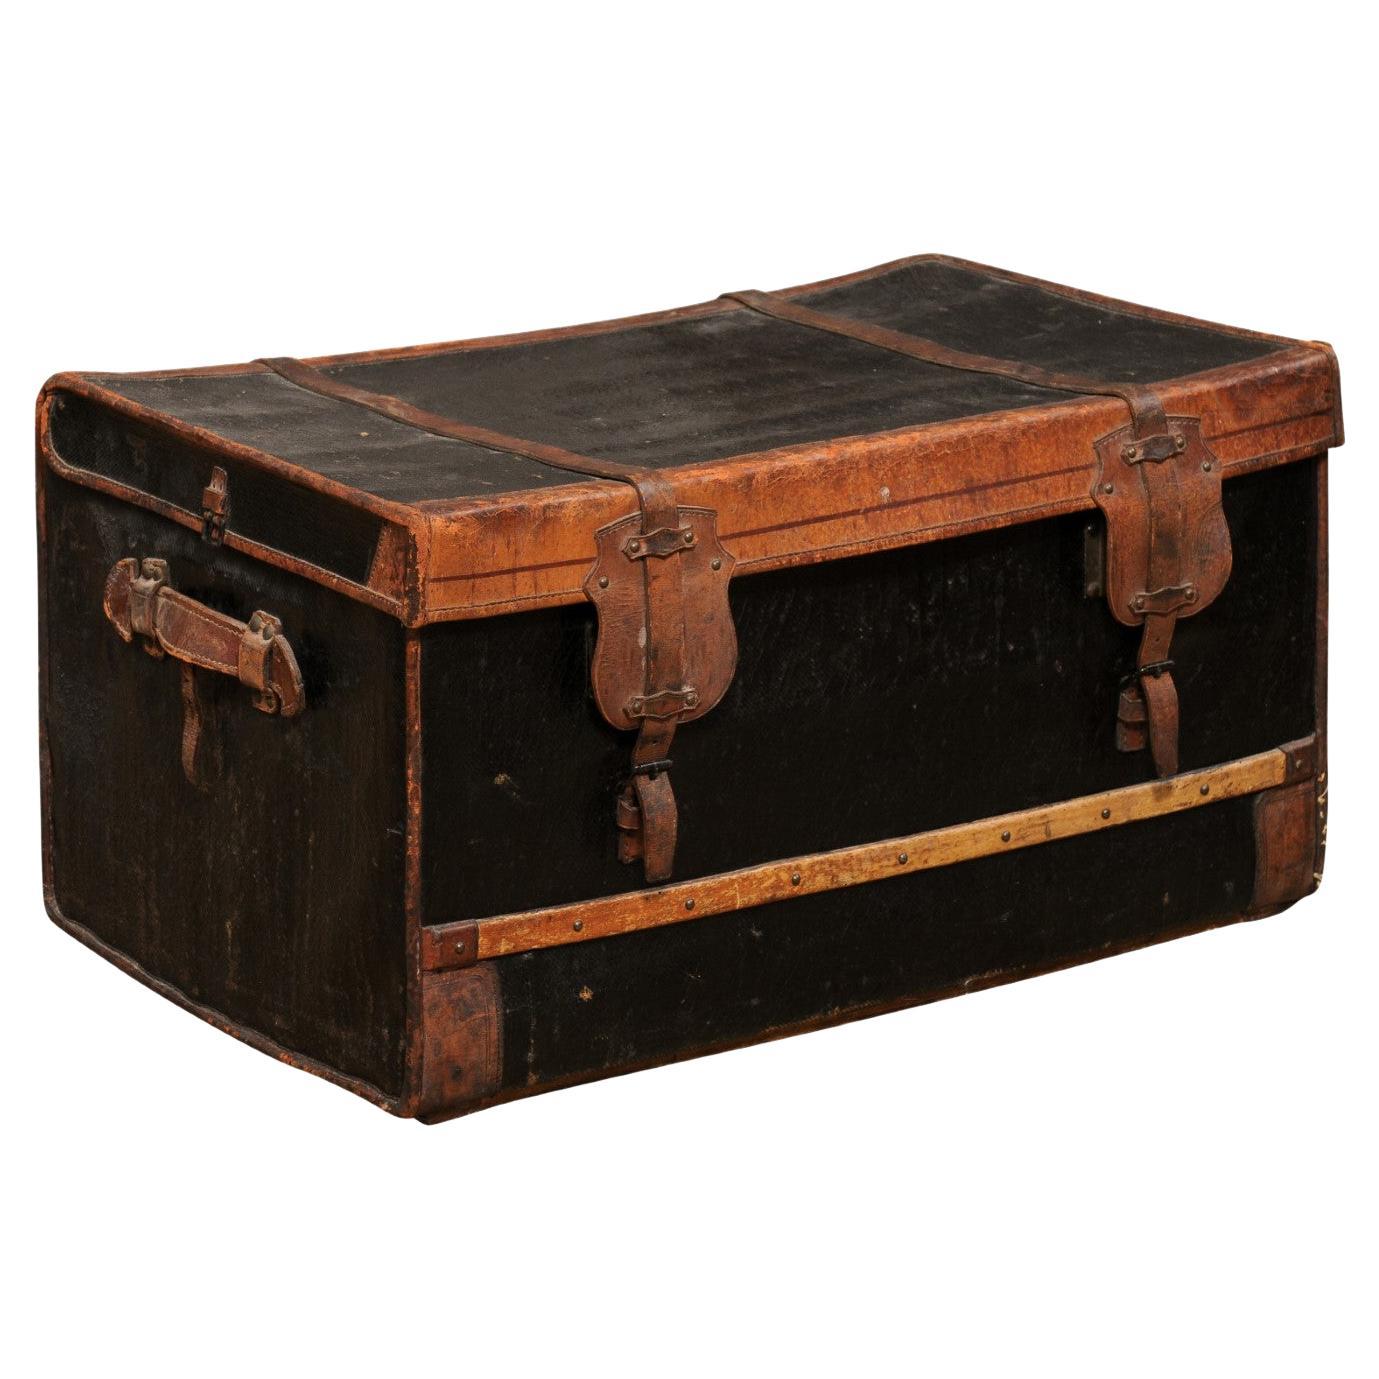 French 1890s Brown and Black Travel Trunk with Leather Straps and Aged Patina